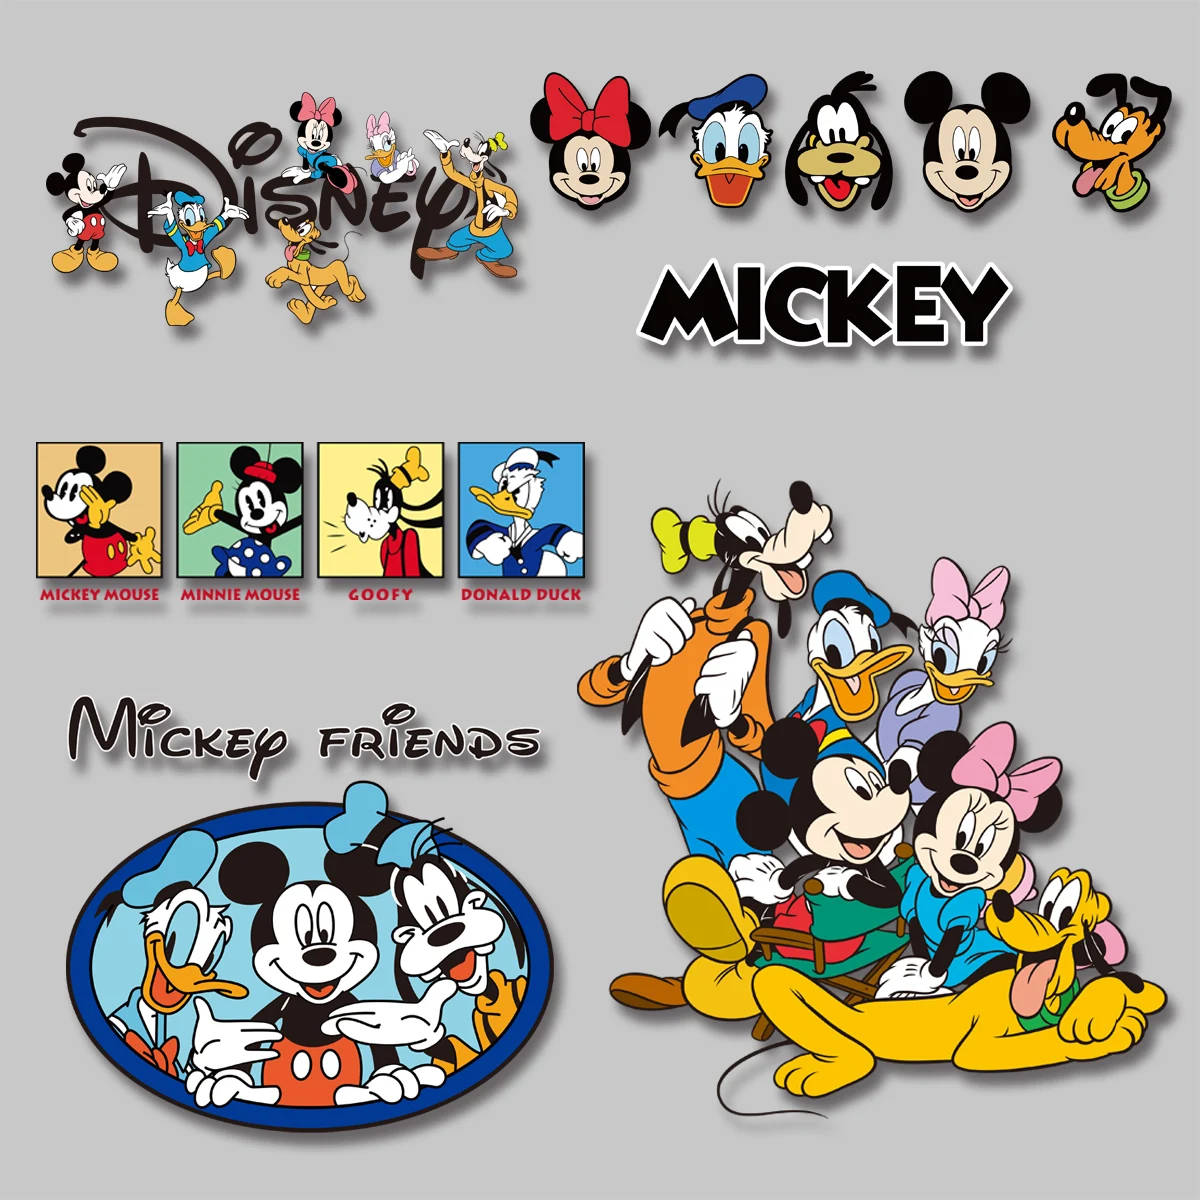 Cartoon animal animation Mickey Minnie Donald Duck Daisy Disney family picture Patches for Clothing DIY T-shirt DIY Appliques